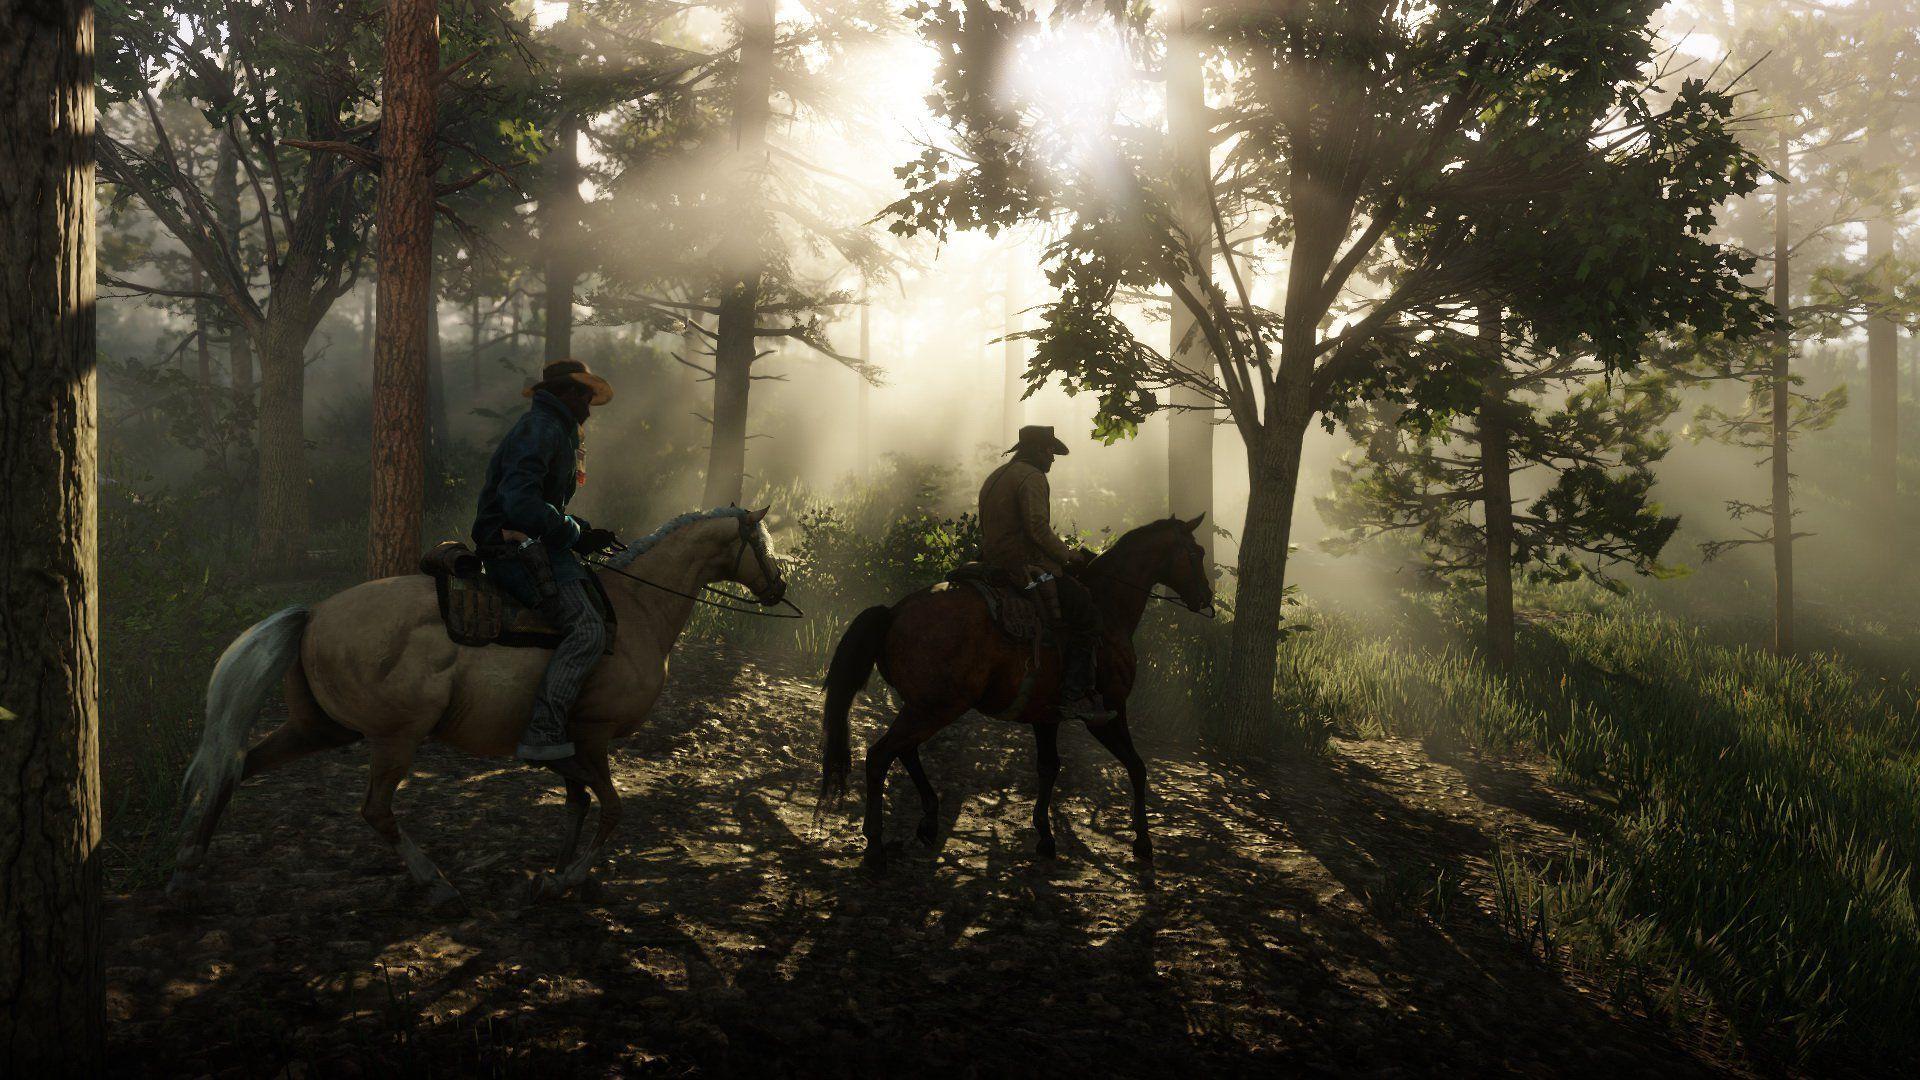 Red Dead Redemption 2 Requires 105 GB Install, Supports 32 Players